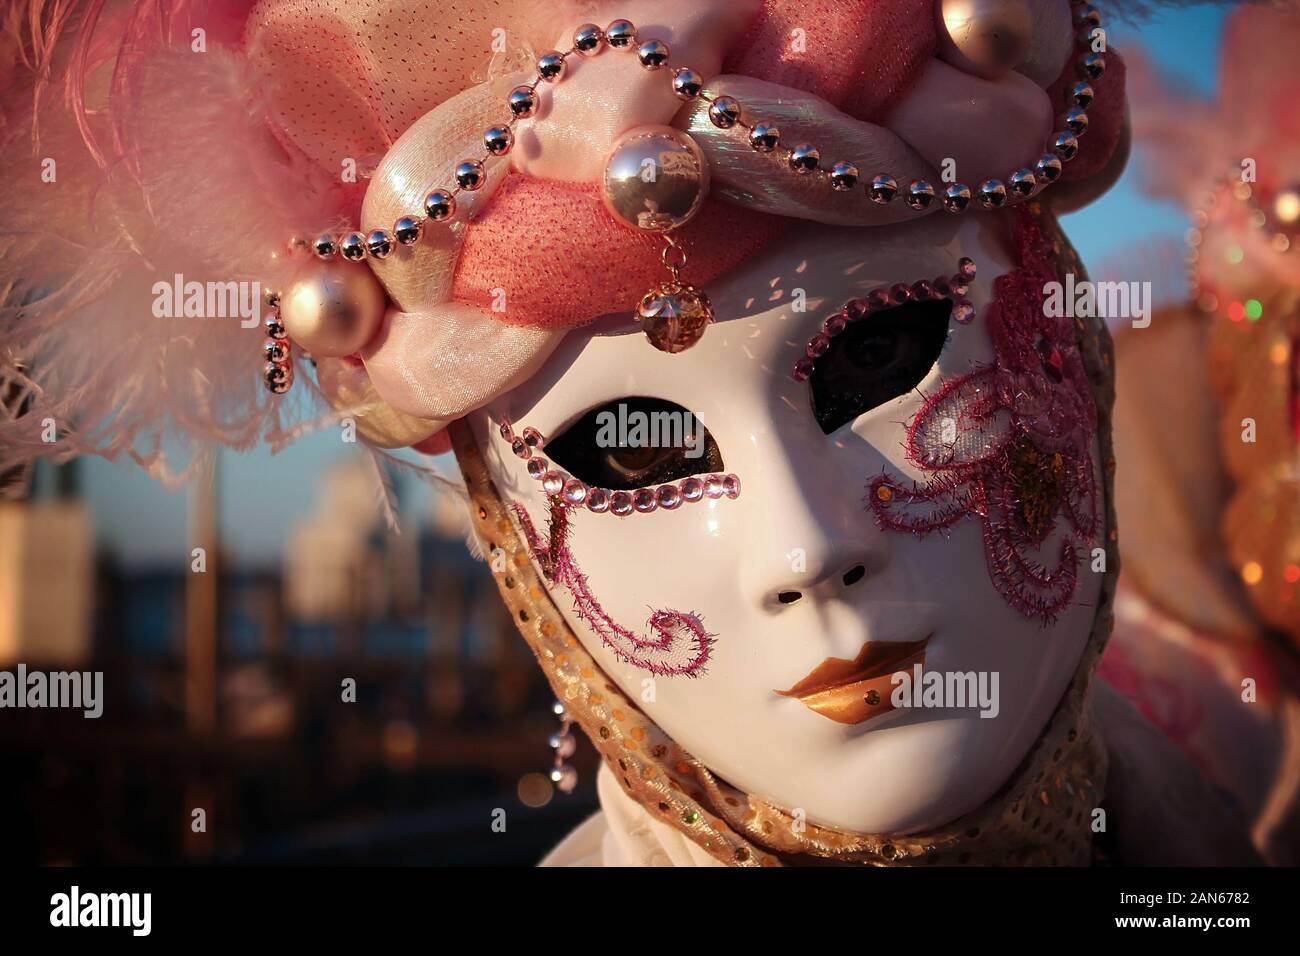 Venice carnival costume and mask, Italy 2016. Stock Photo